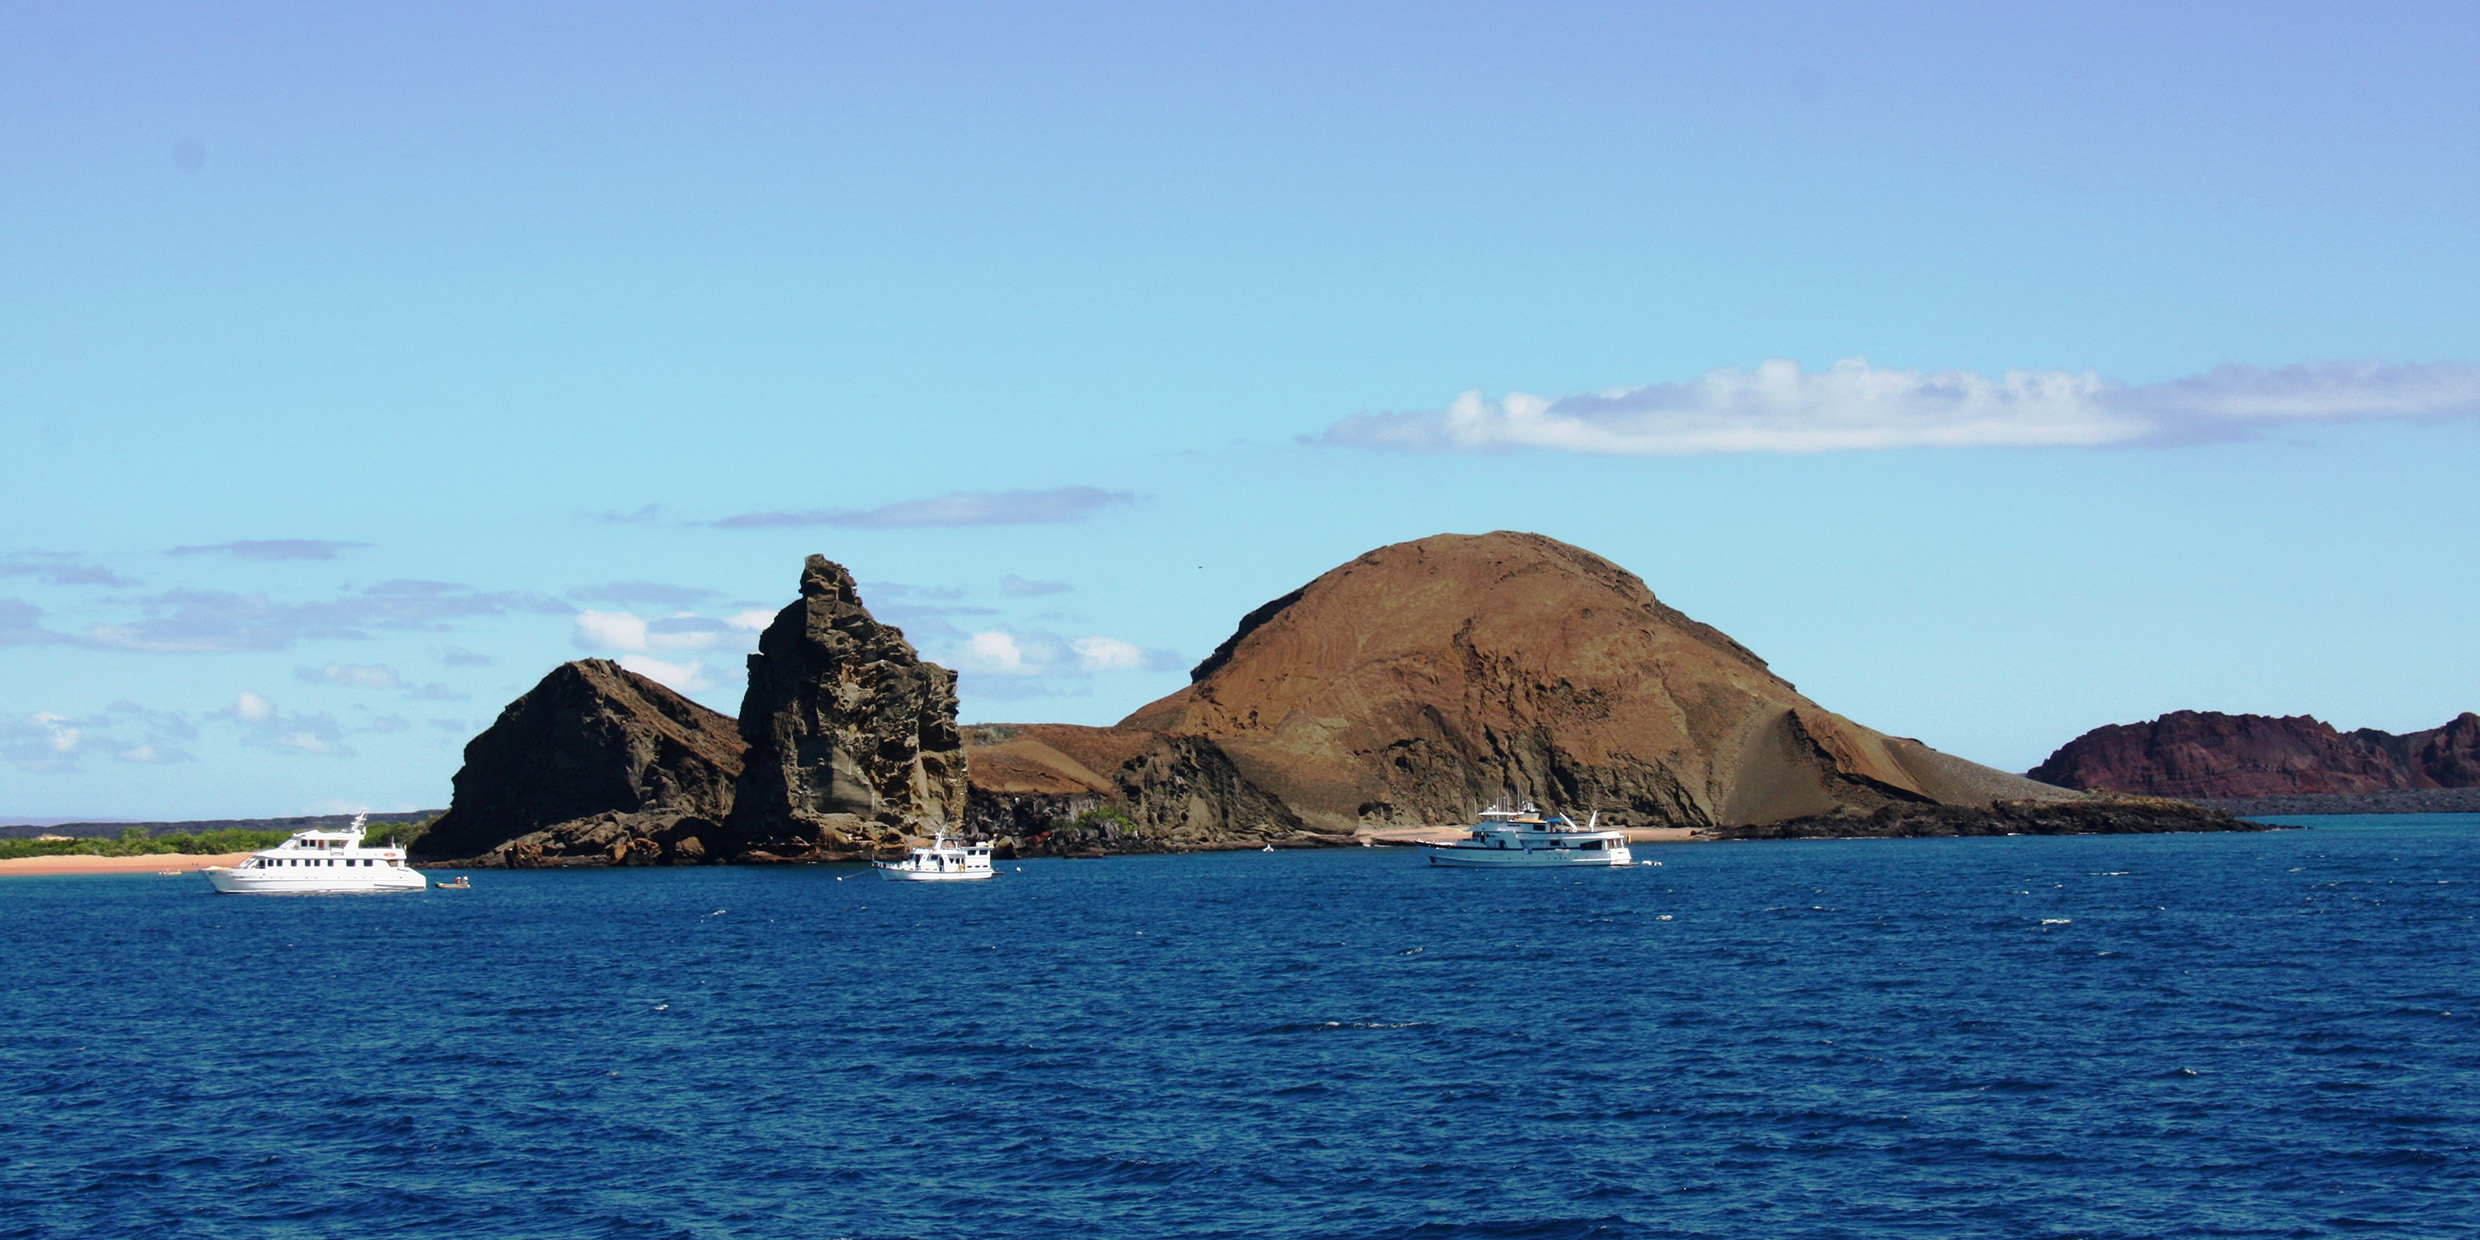 Image of a rocky island with several recreational boats offshore